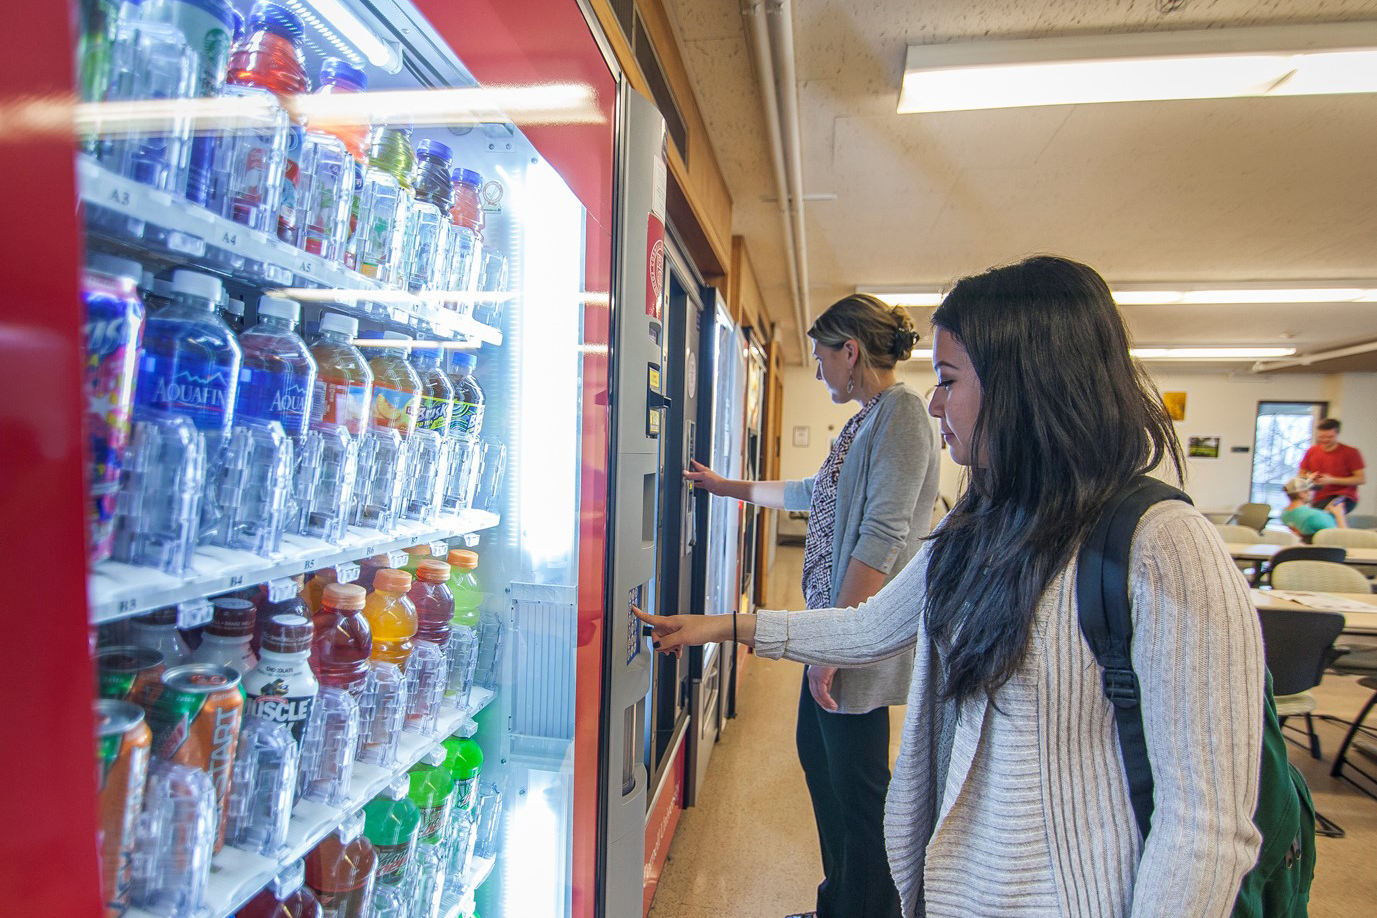 two women spend break time getting snacks and drinks from vending machines